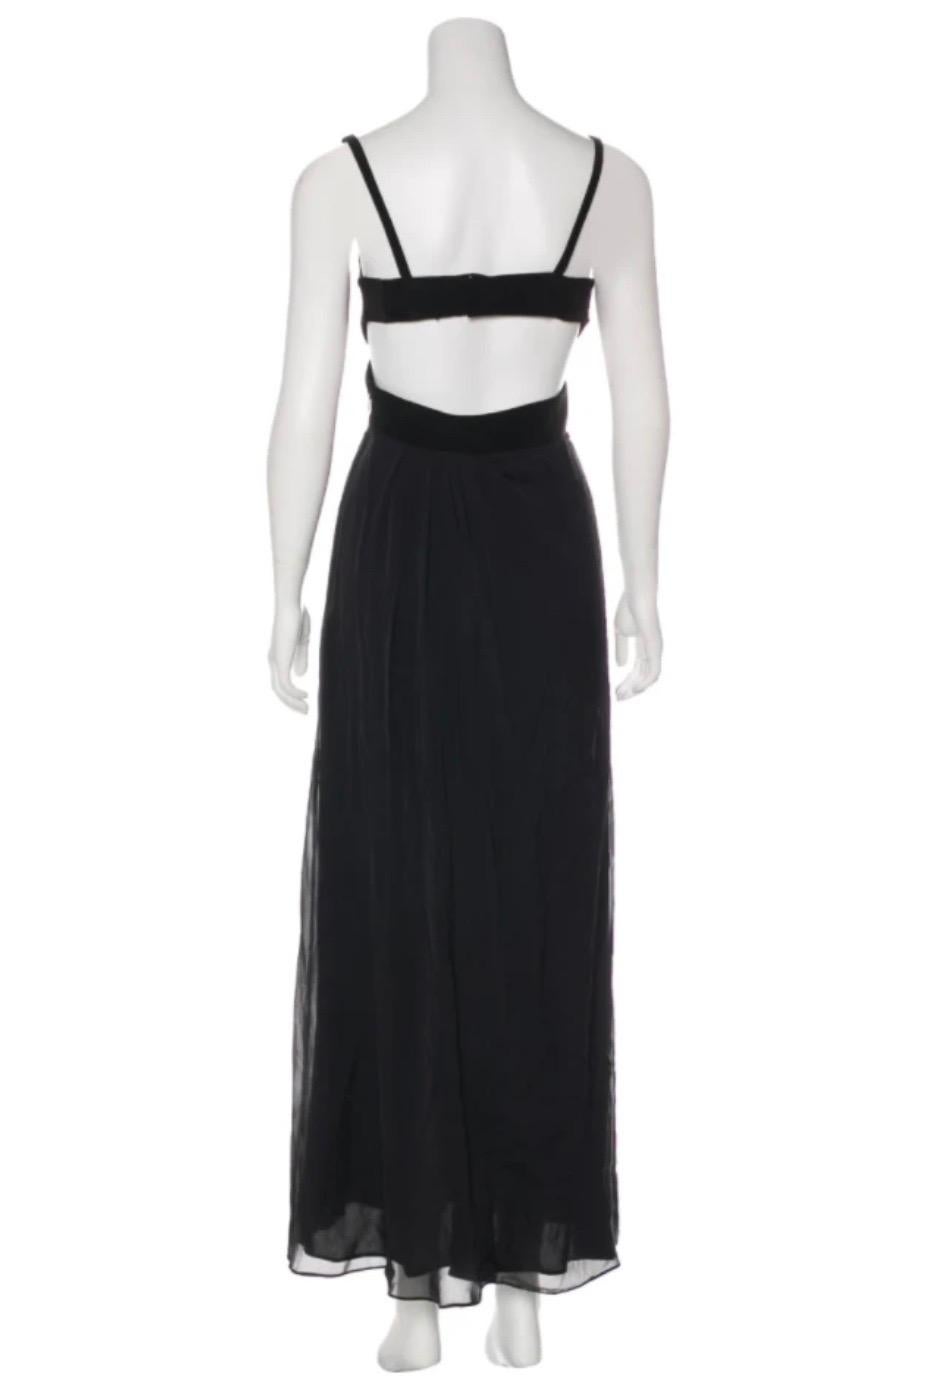 Gucci by Tom Ford black silk sleeveless dress with exposed back. Condition: Excellent. Sz US 4 / IT 40

23